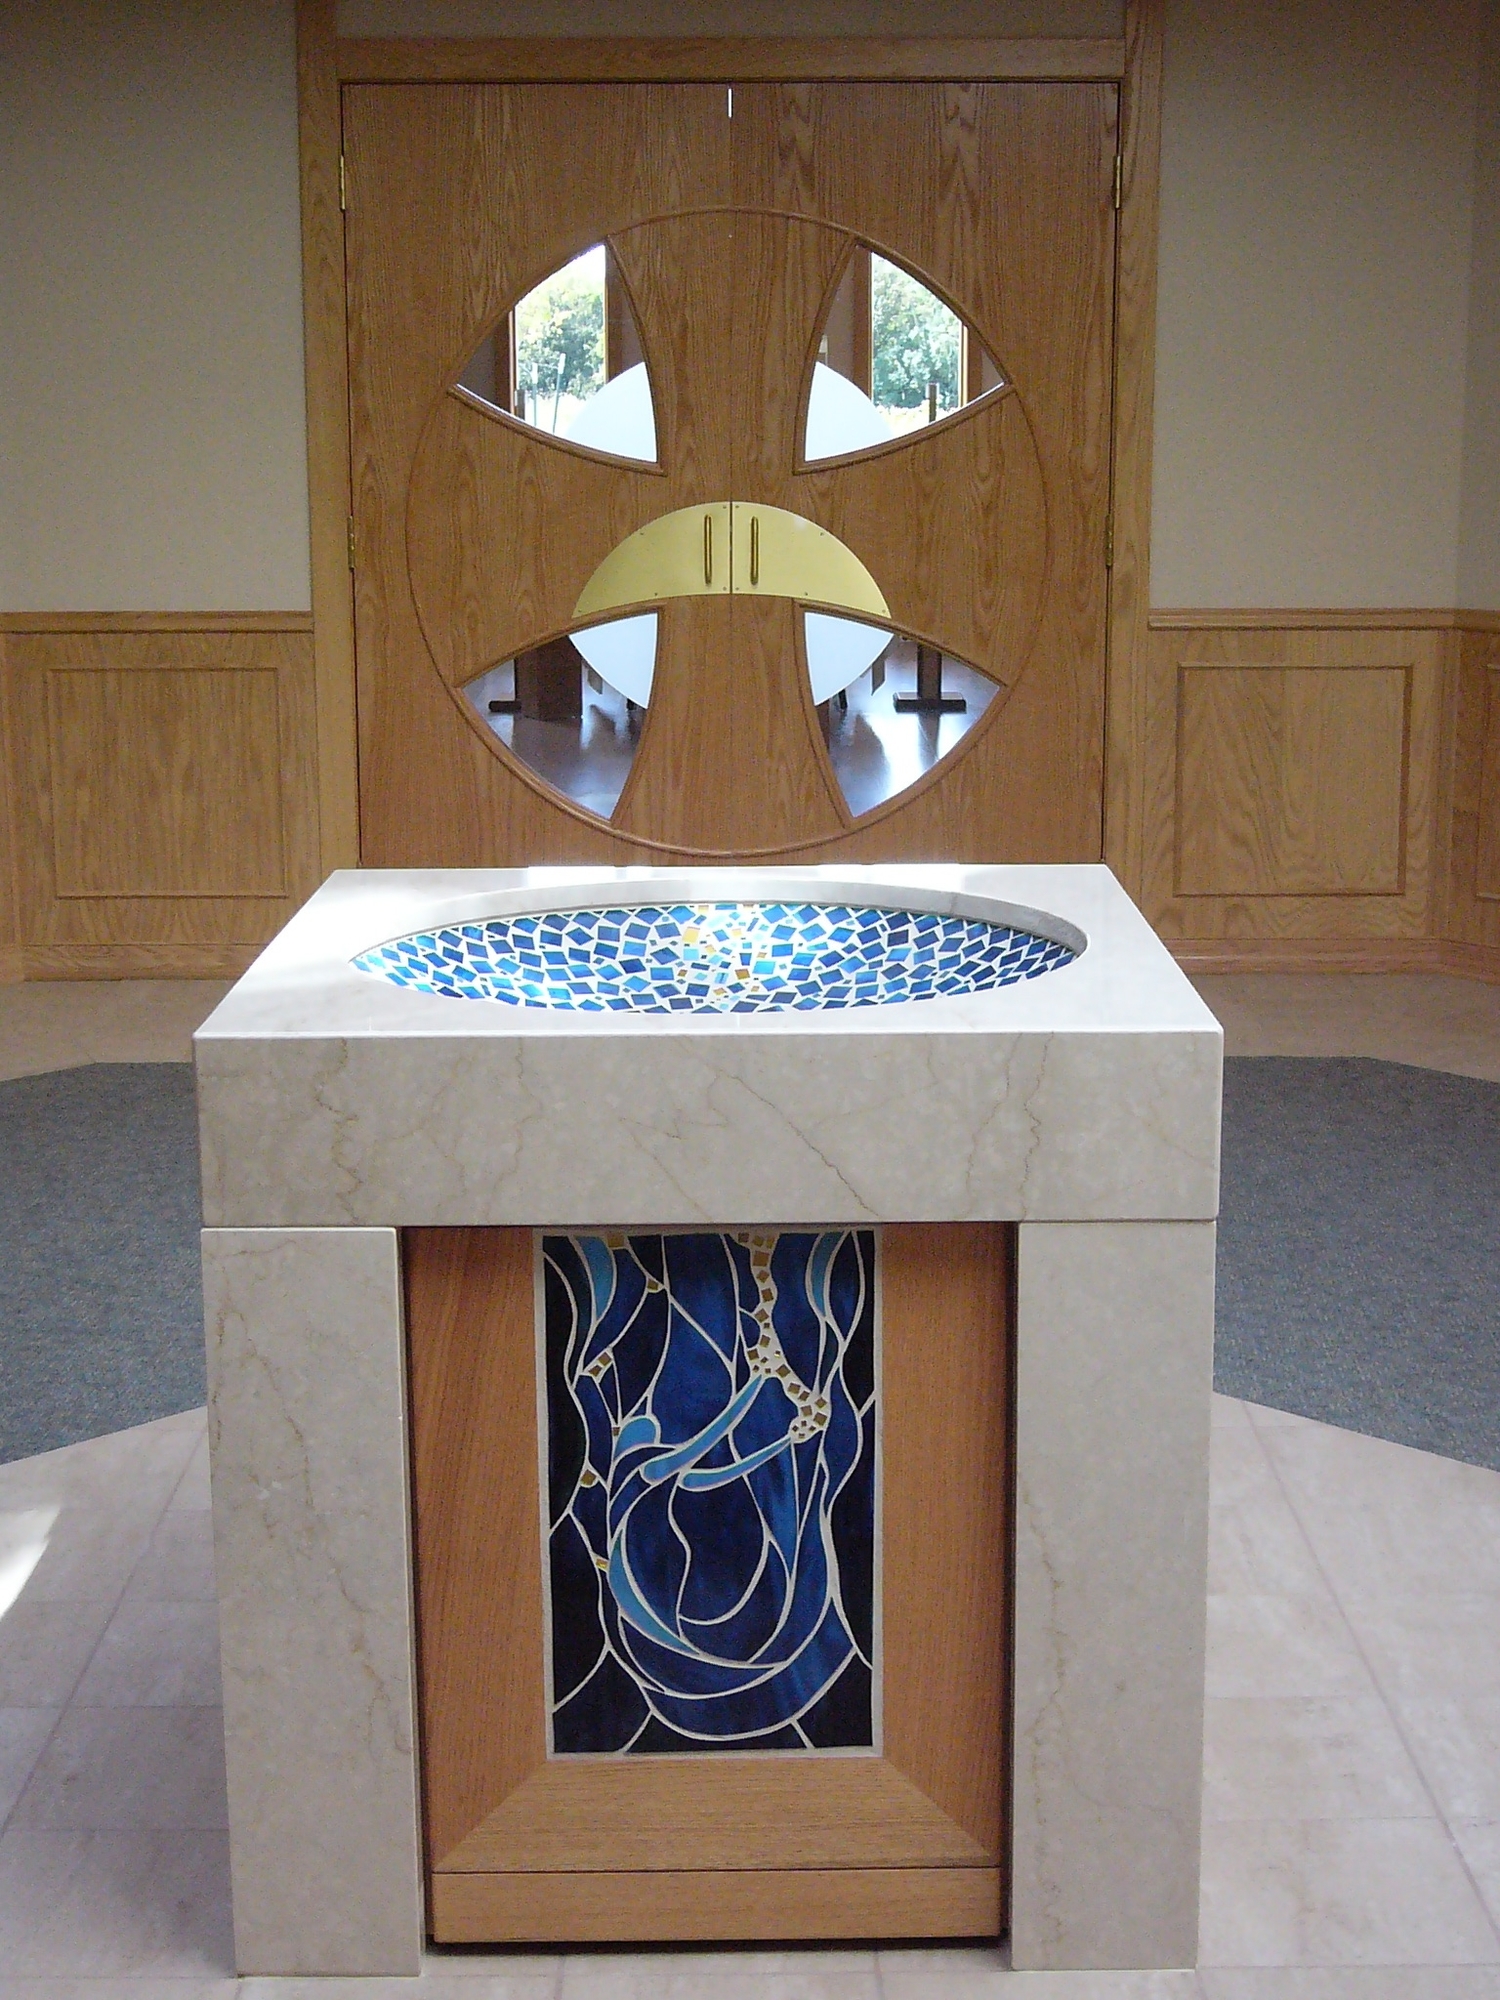 Baptismal Bowl with Exquisite Mosaic Art, Sisters of St. Francis of the Holy, Bay Settlement, WI.